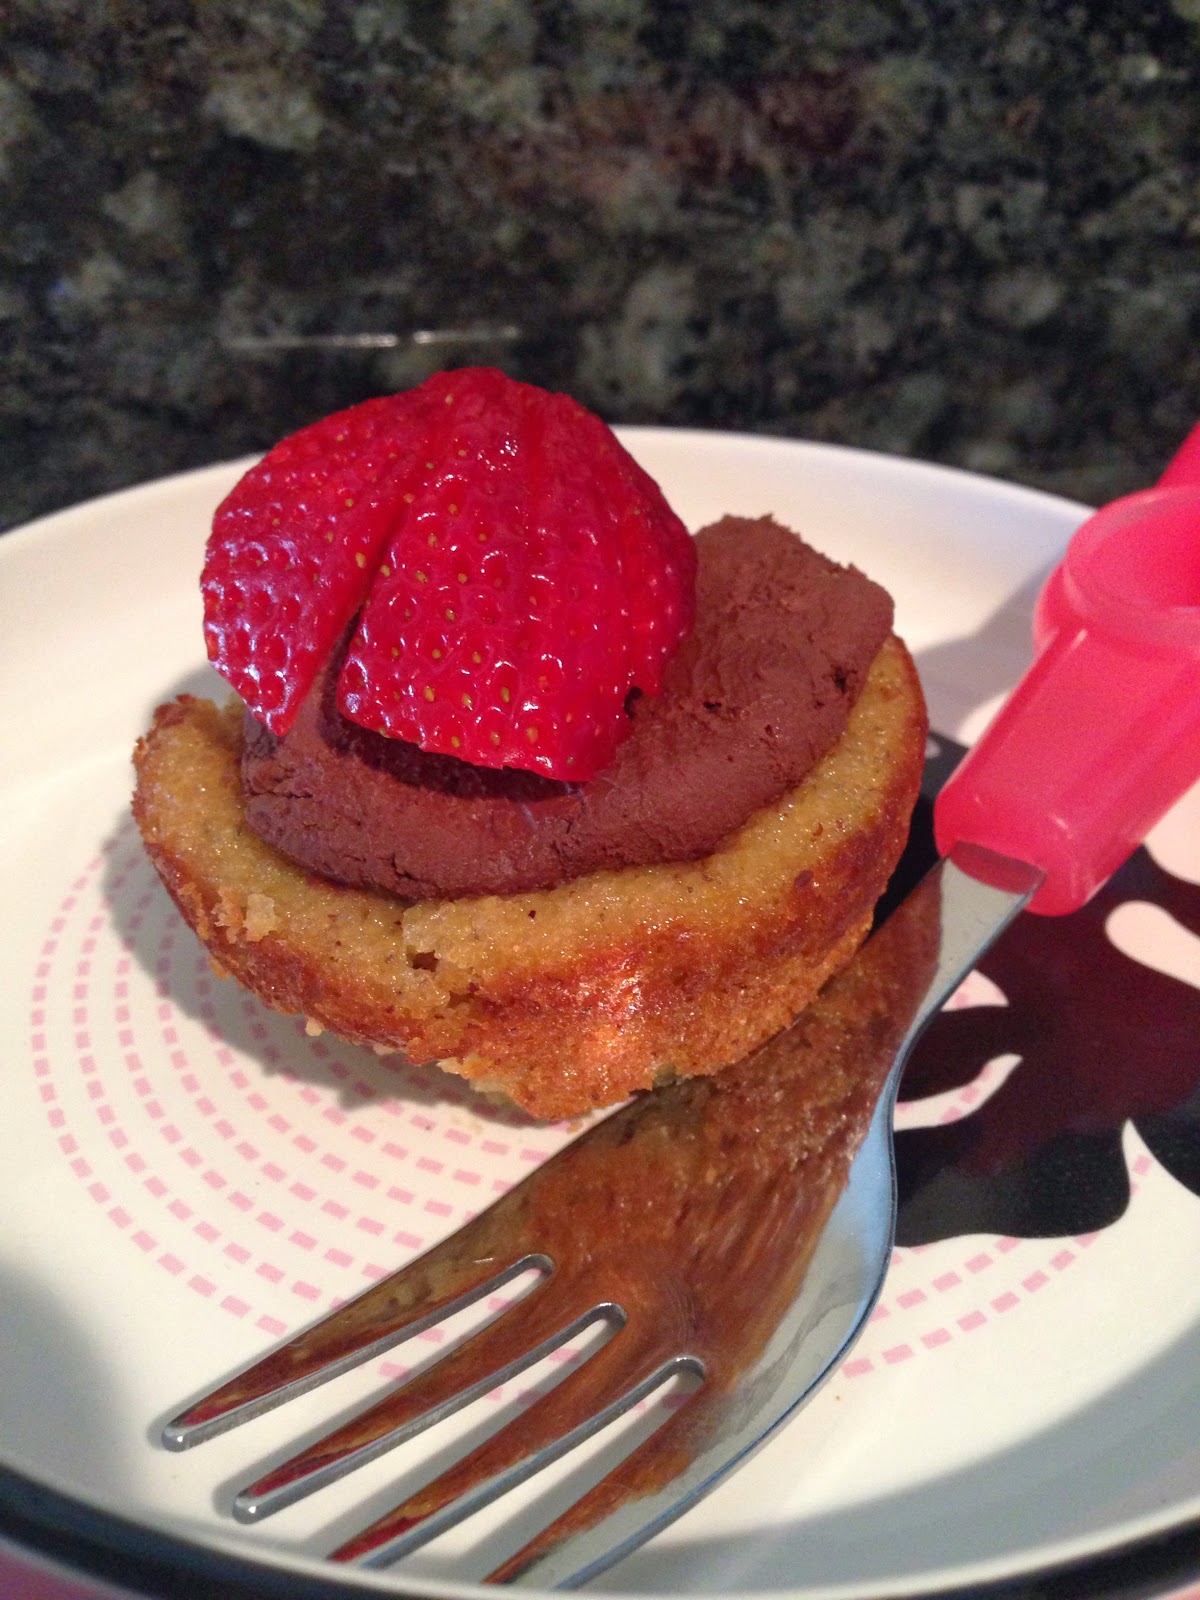 This one is a Strawberry Passover Quinoa Cupcake